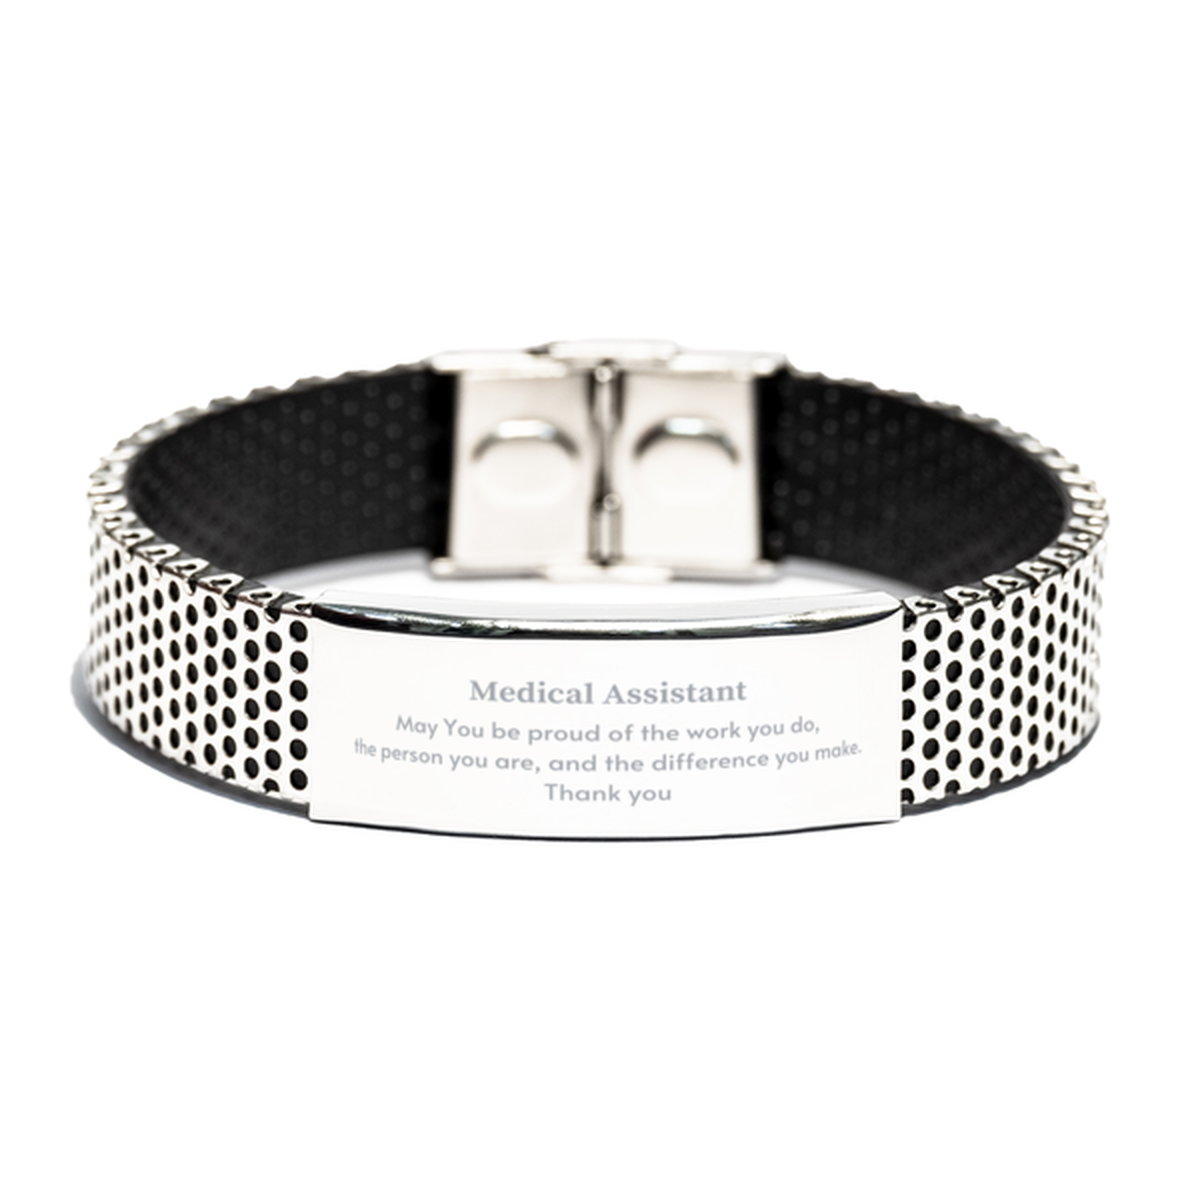 Heartwarming Stainless Steel Bracelet Retirement Coworkers Gifts for Medical Assistant, Medical Assistant May You be proud of the work you do, the person you are Gifts for Boss Men Women Friends